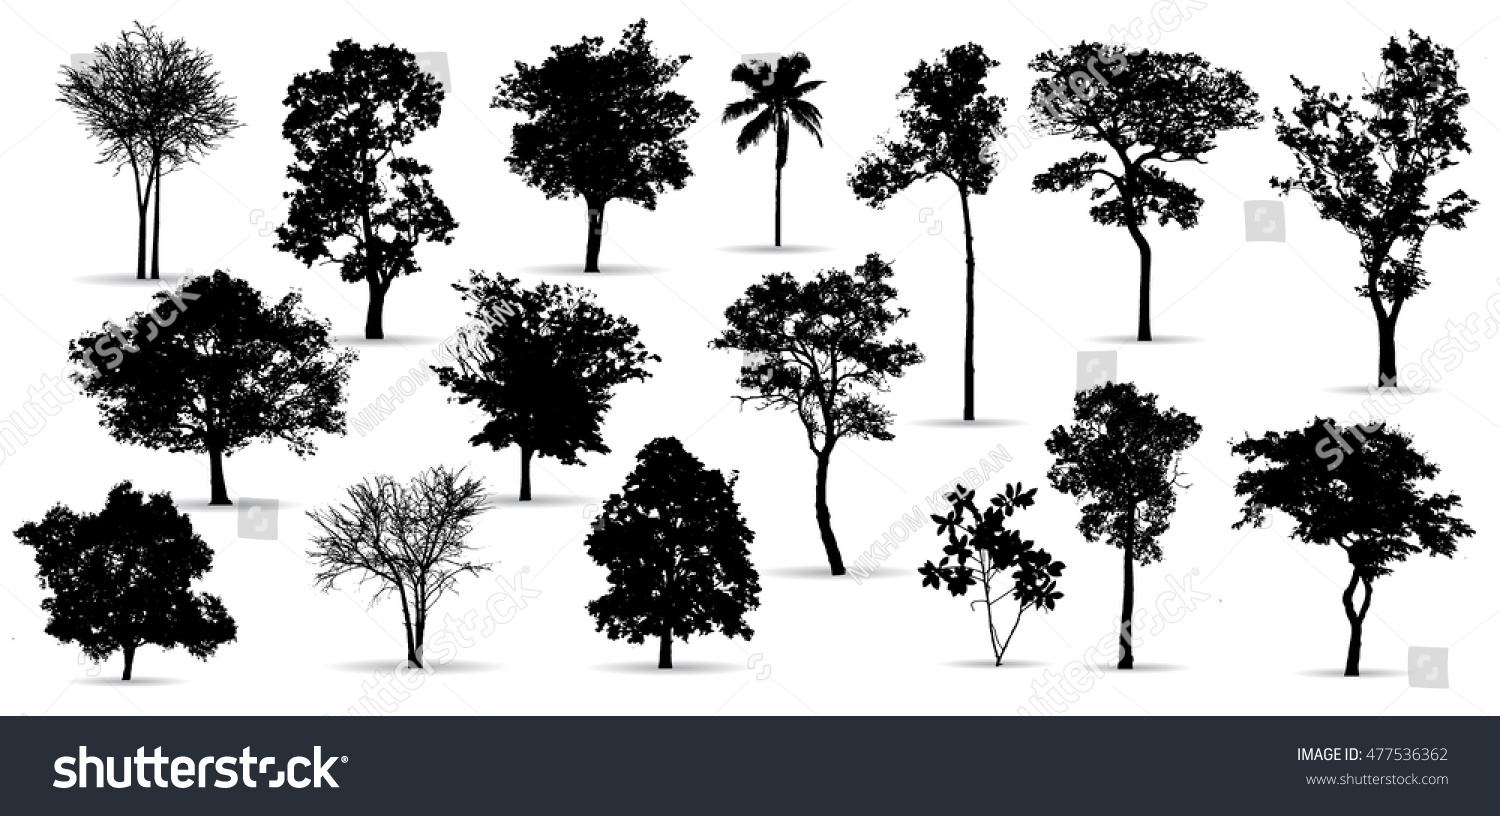 tree silhouettes on white background. Vector illustration. #477536362